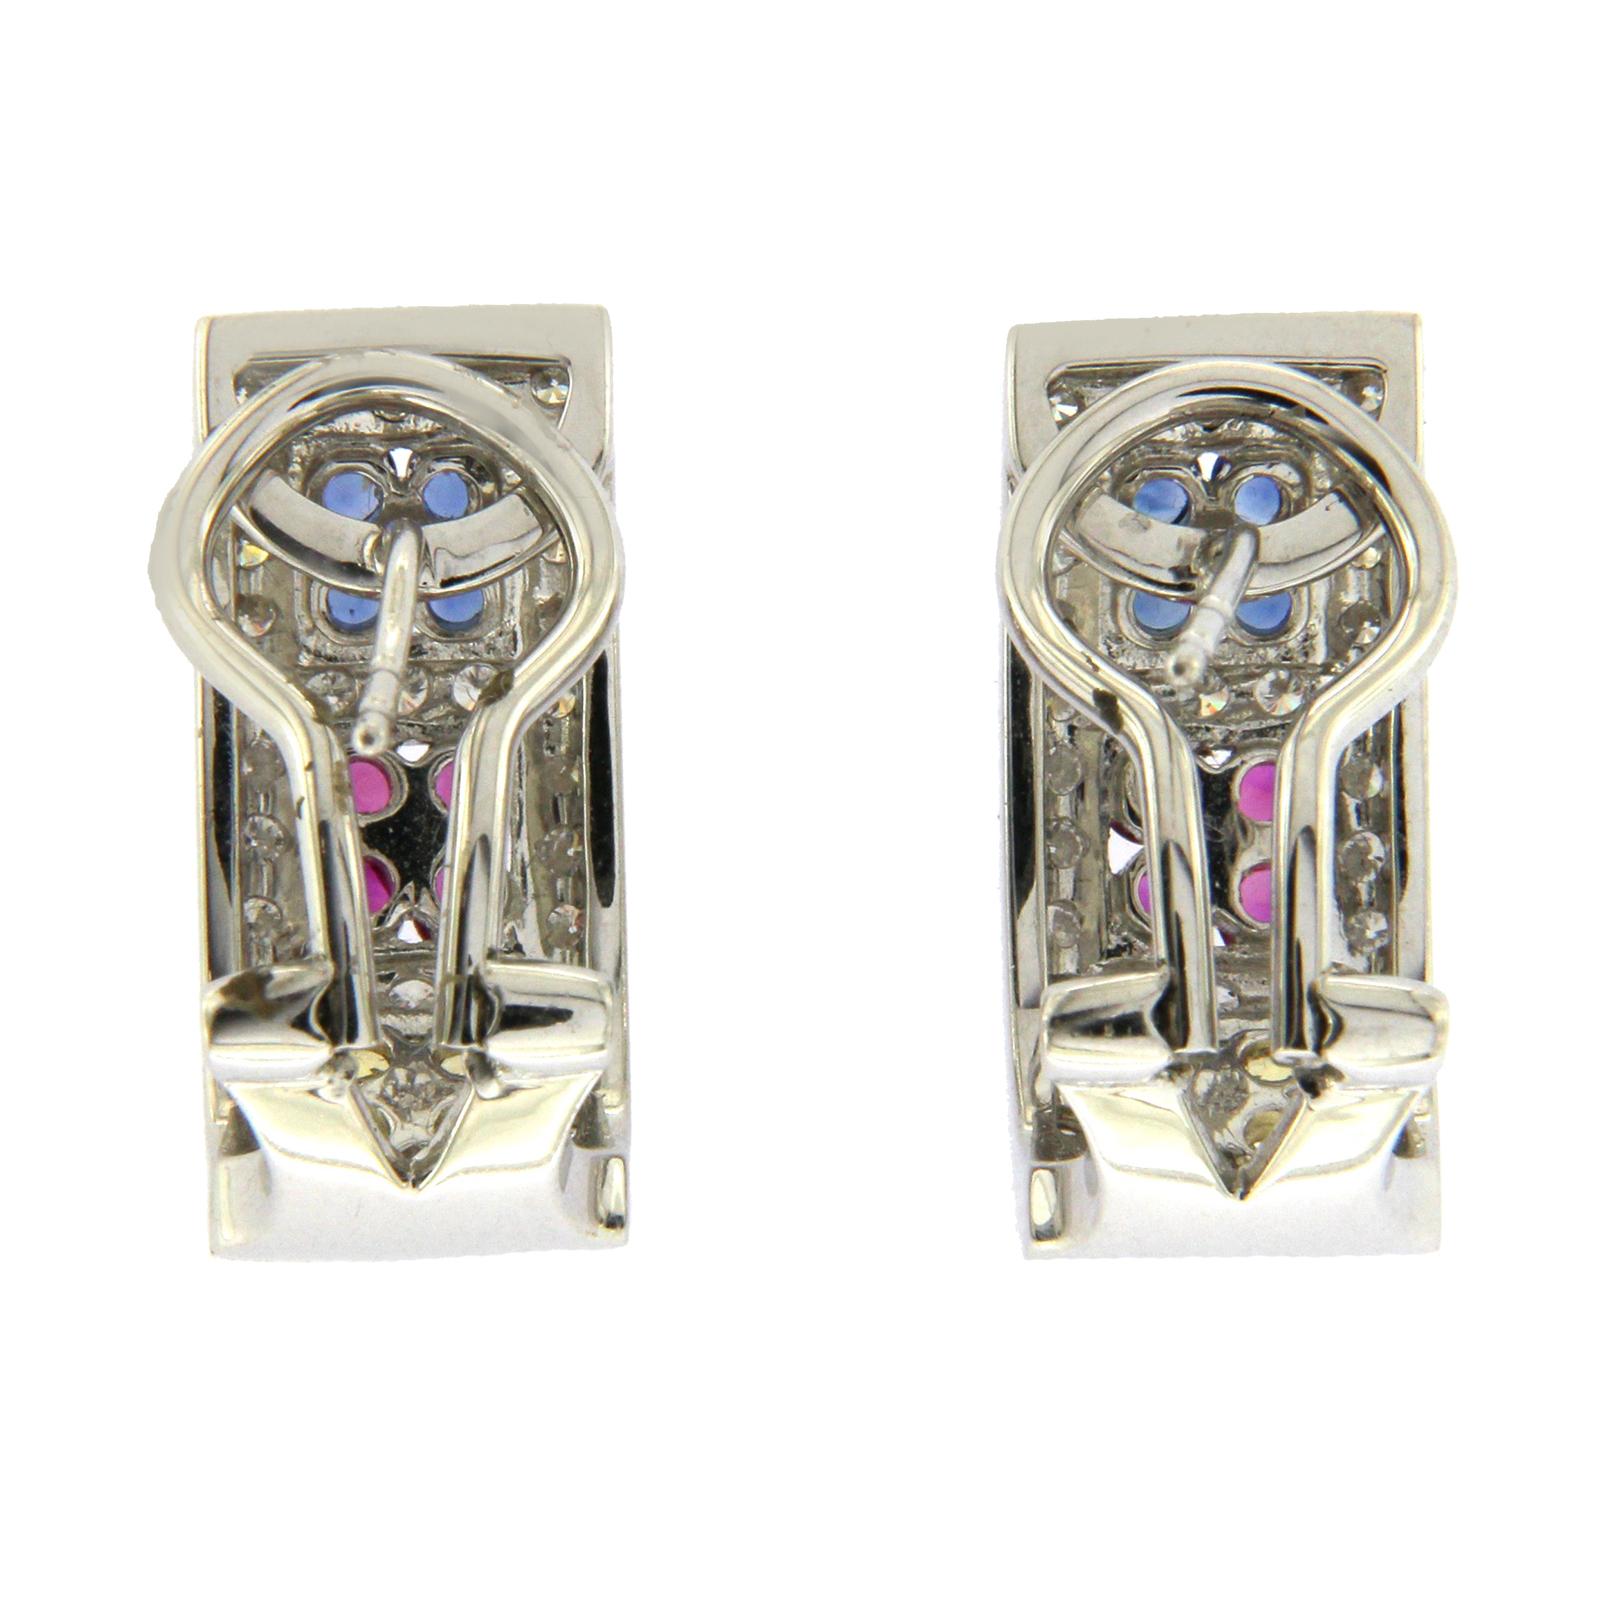 18k Gold 0.93 Ct Diamonds & 1.38 Ct Multi Sapphire Omega Back Earrings In Excellent Condition For Sale In Los Angeles, CA